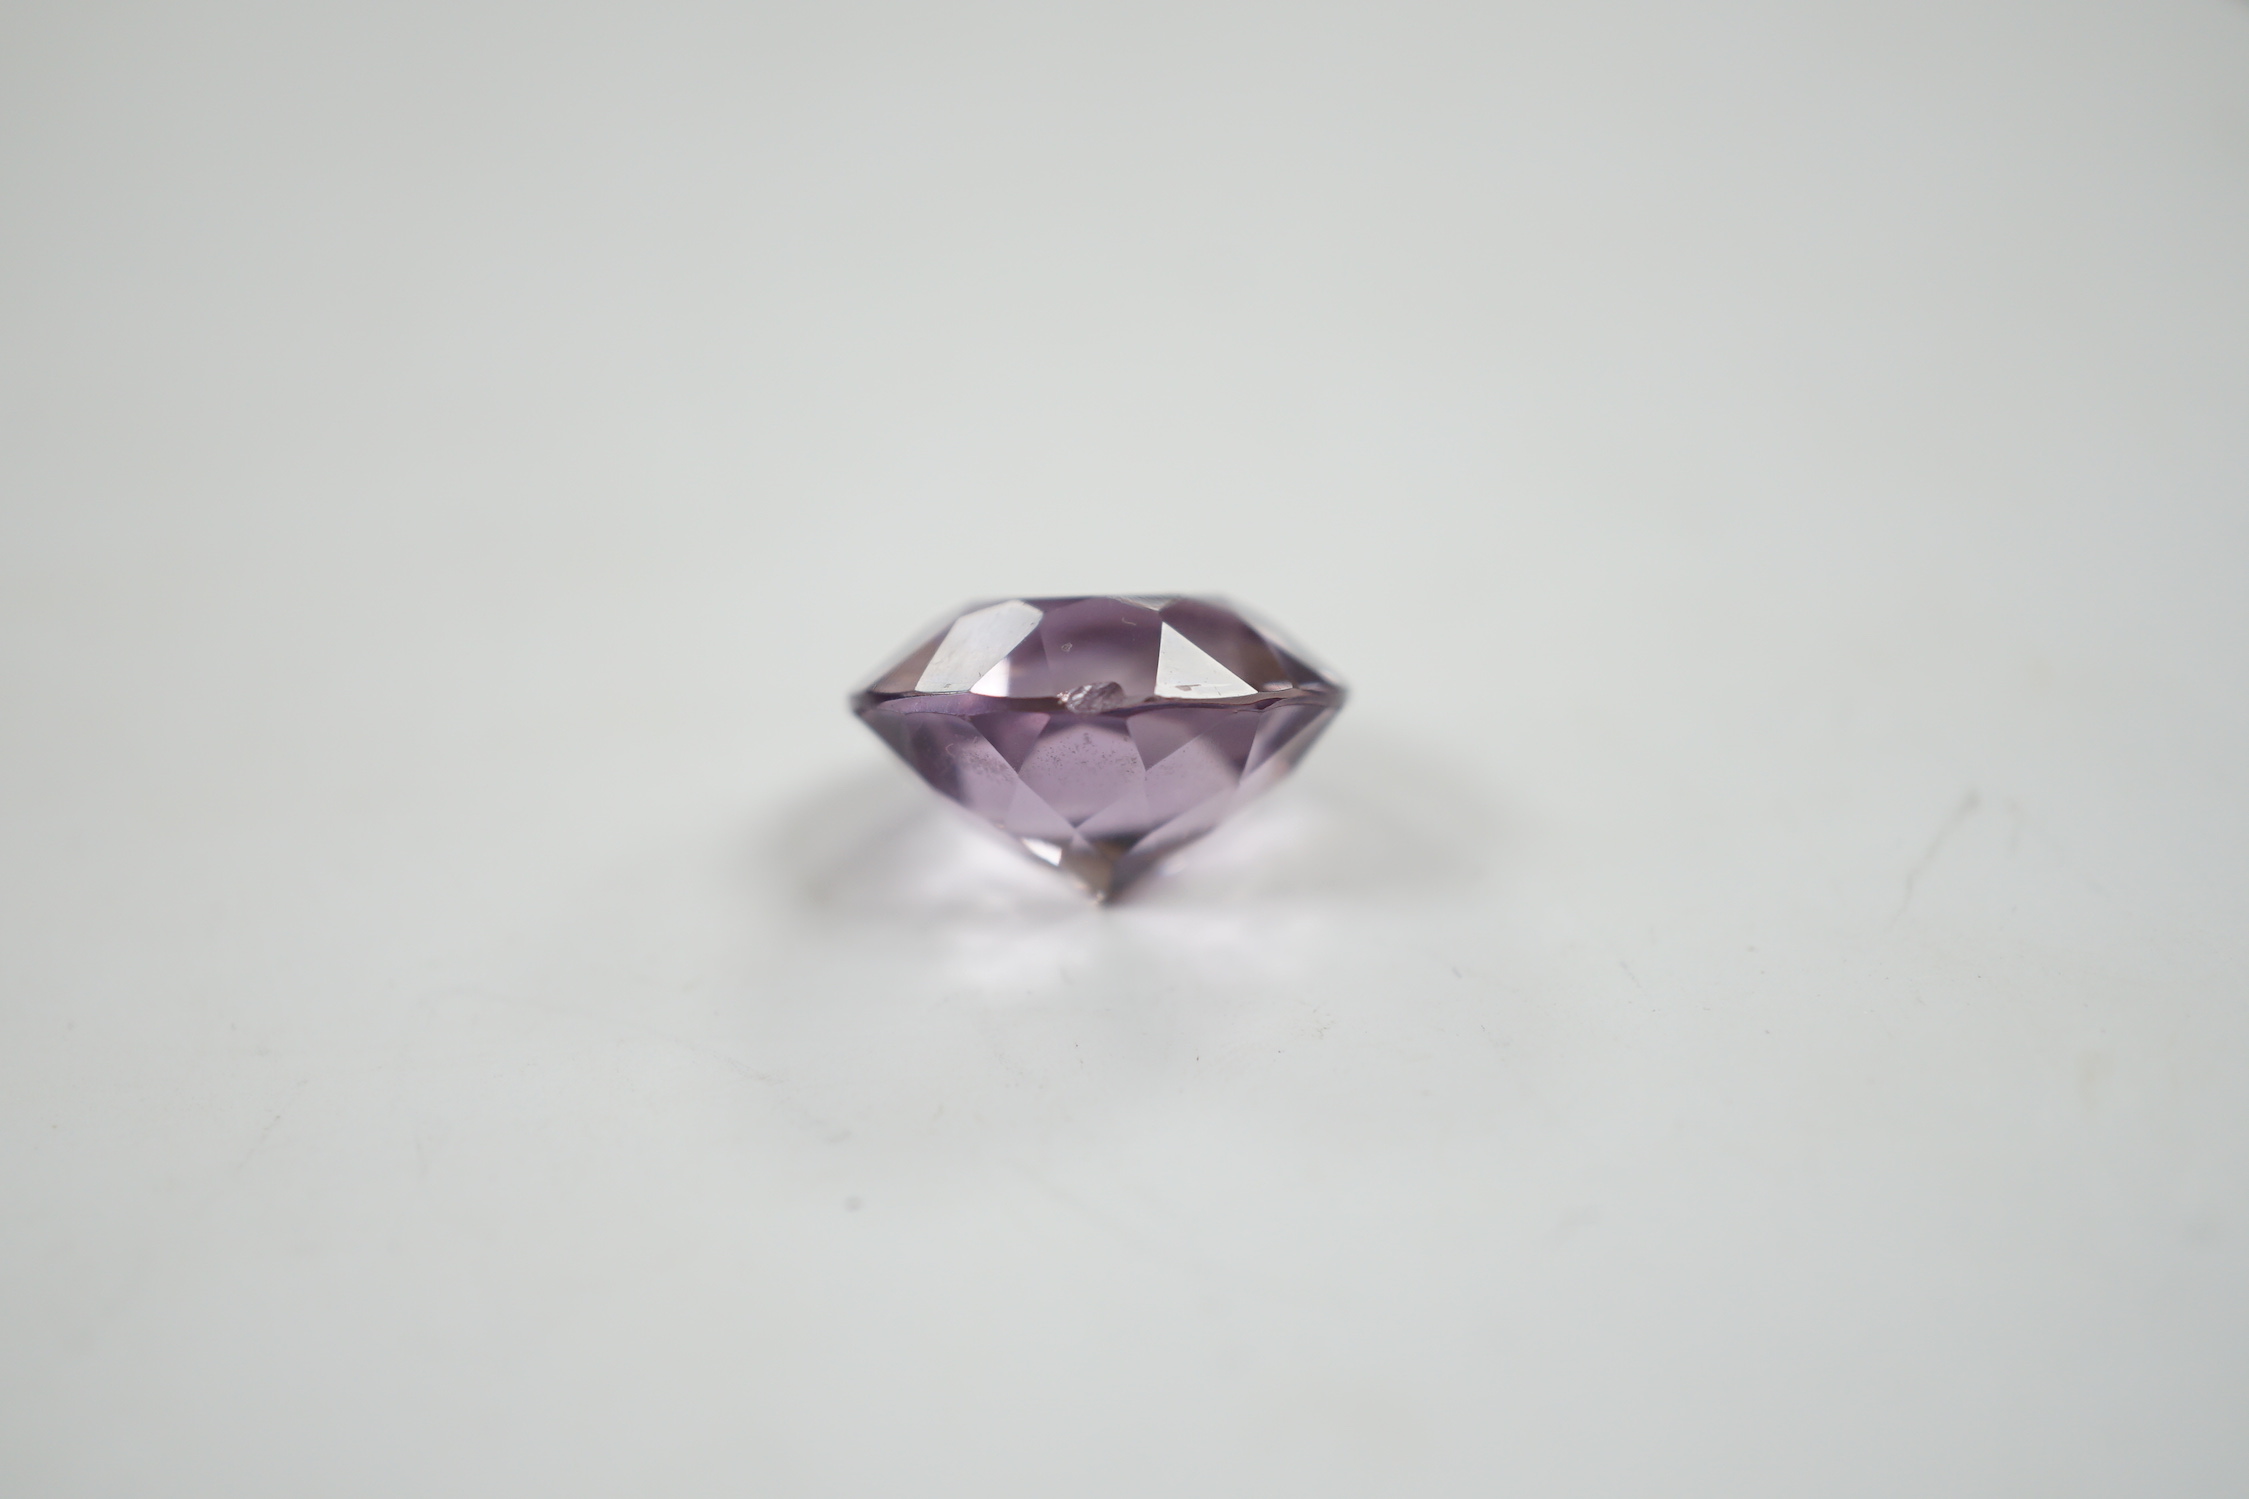 An unmounted round cut amethyst, weighing approximately 15.9ct.